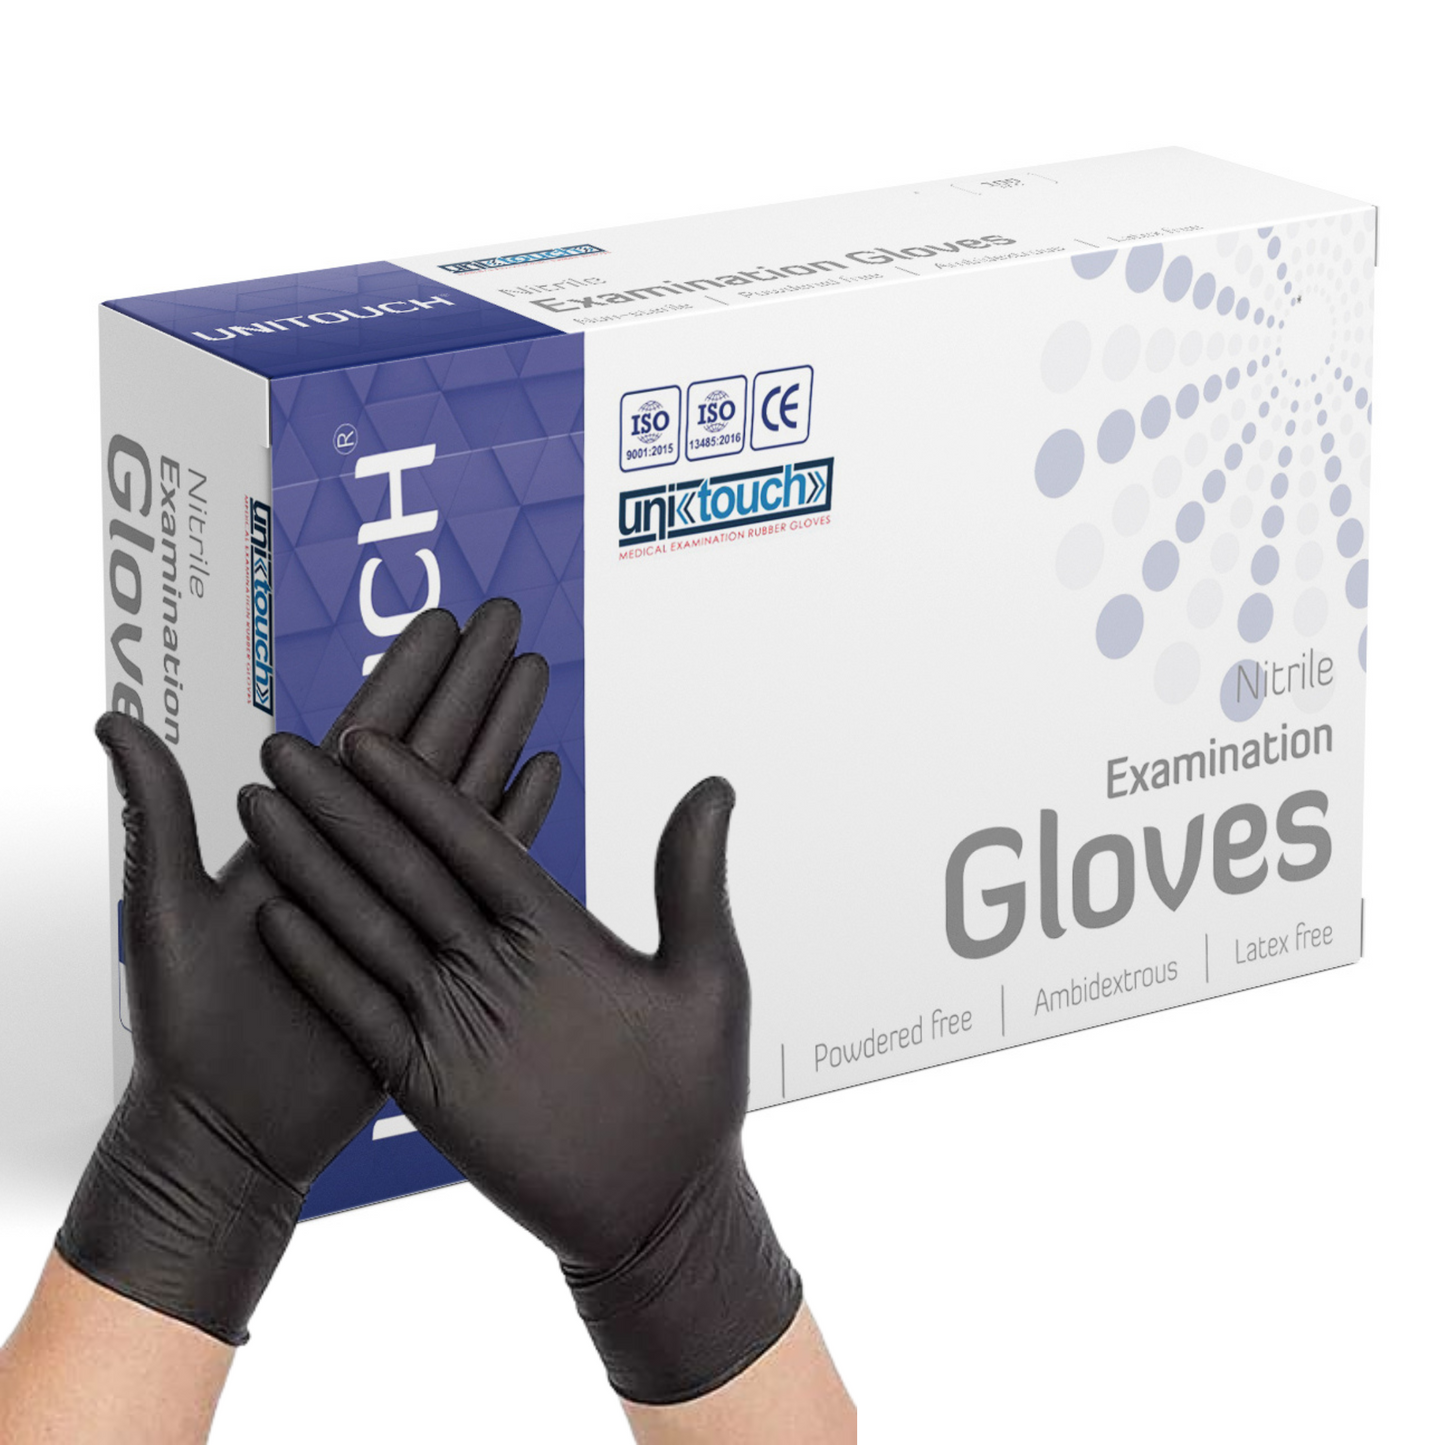 Unitouch Nitrile Powdered Free Examination Gloves (Black) Pack of 100 Pcs